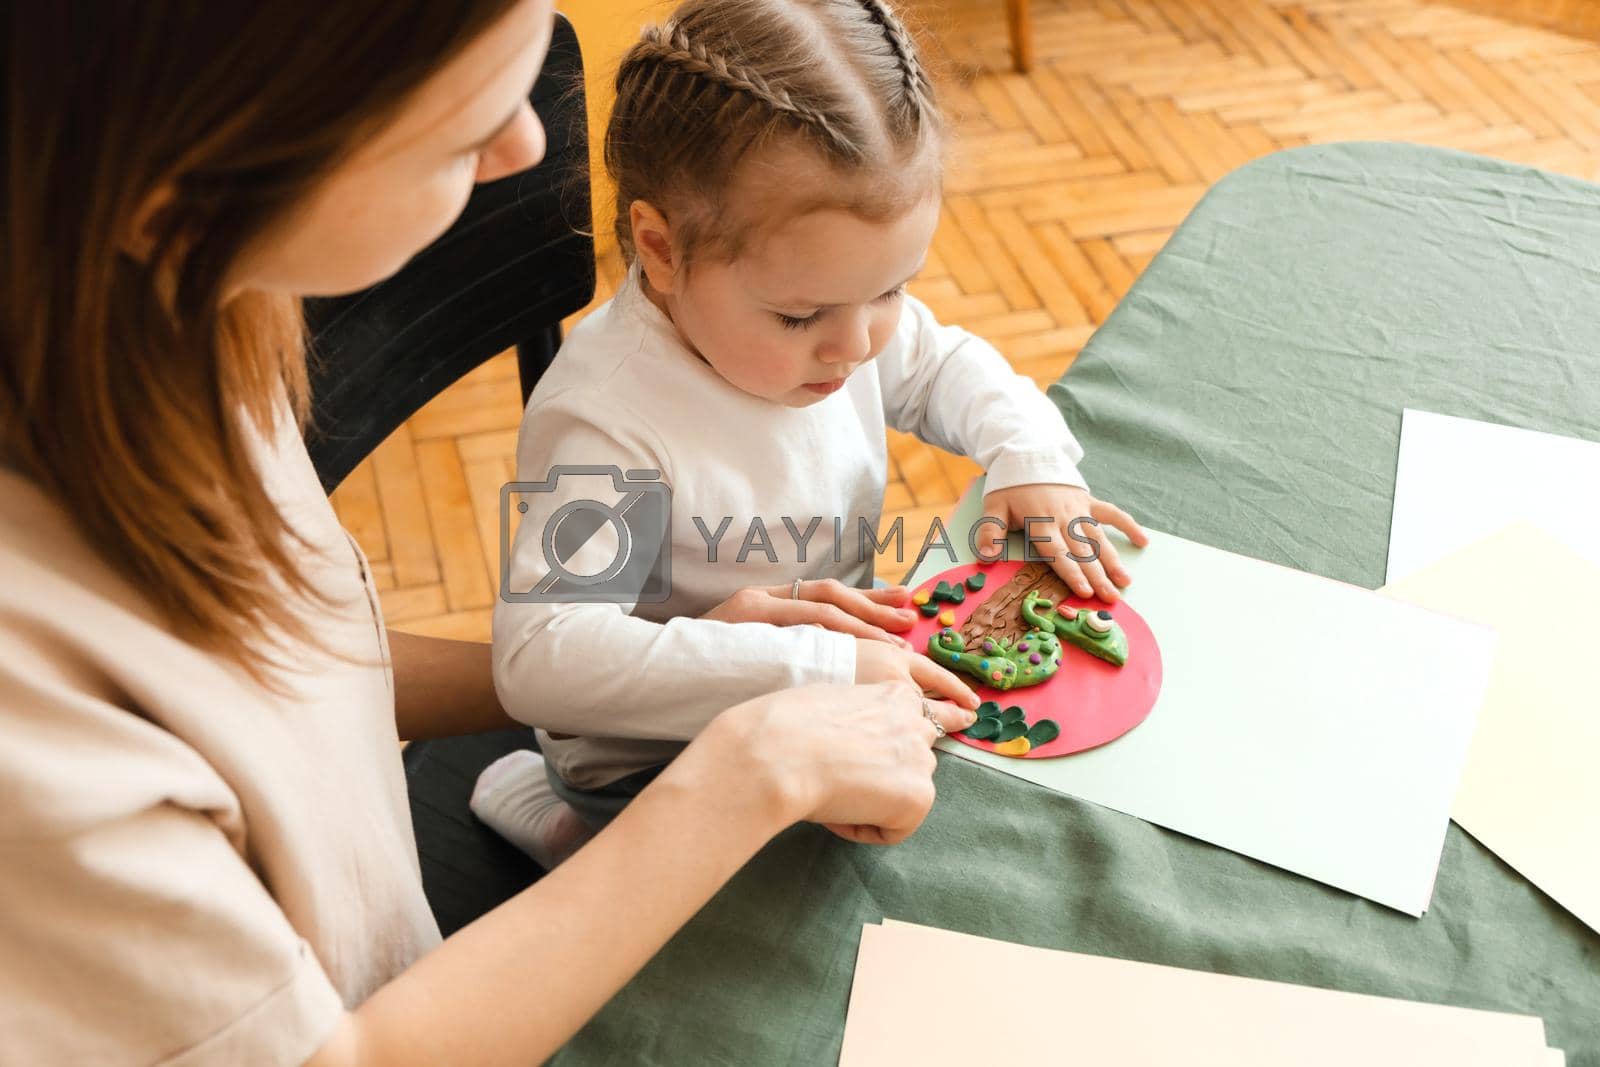 Mother and little daughter enjoy a creative morning by making crafts for kindergarten